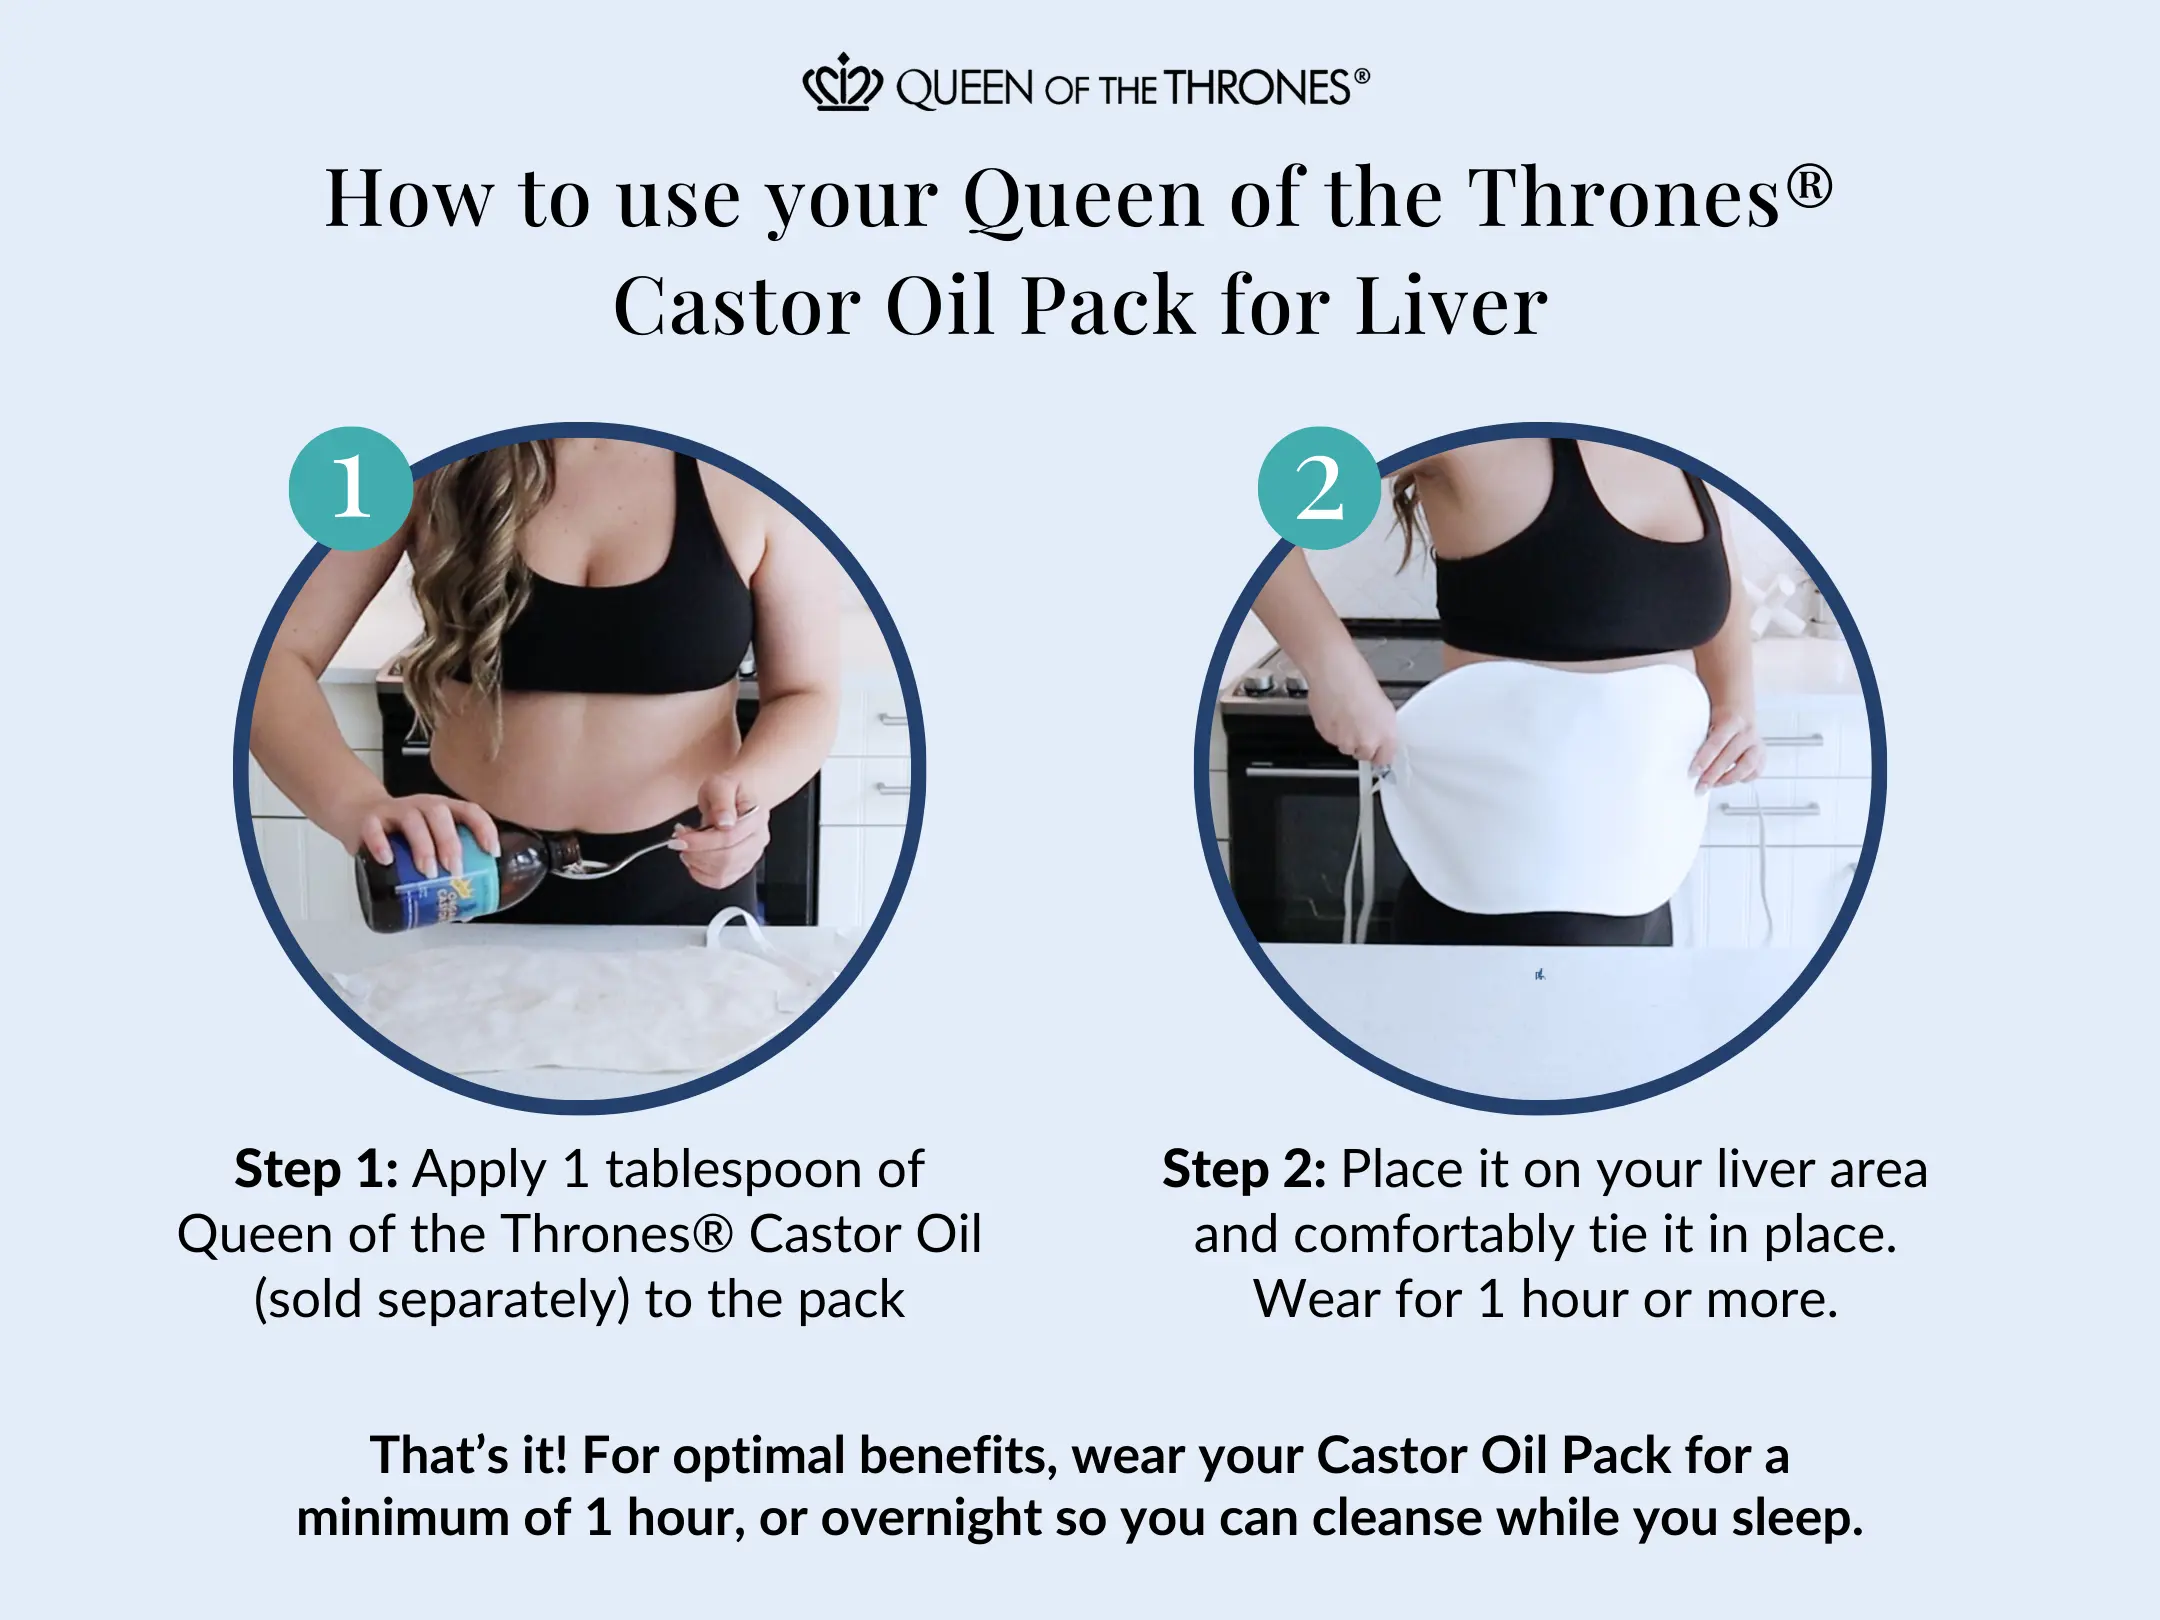 How to use Queen of the Thrones Castor oil pack